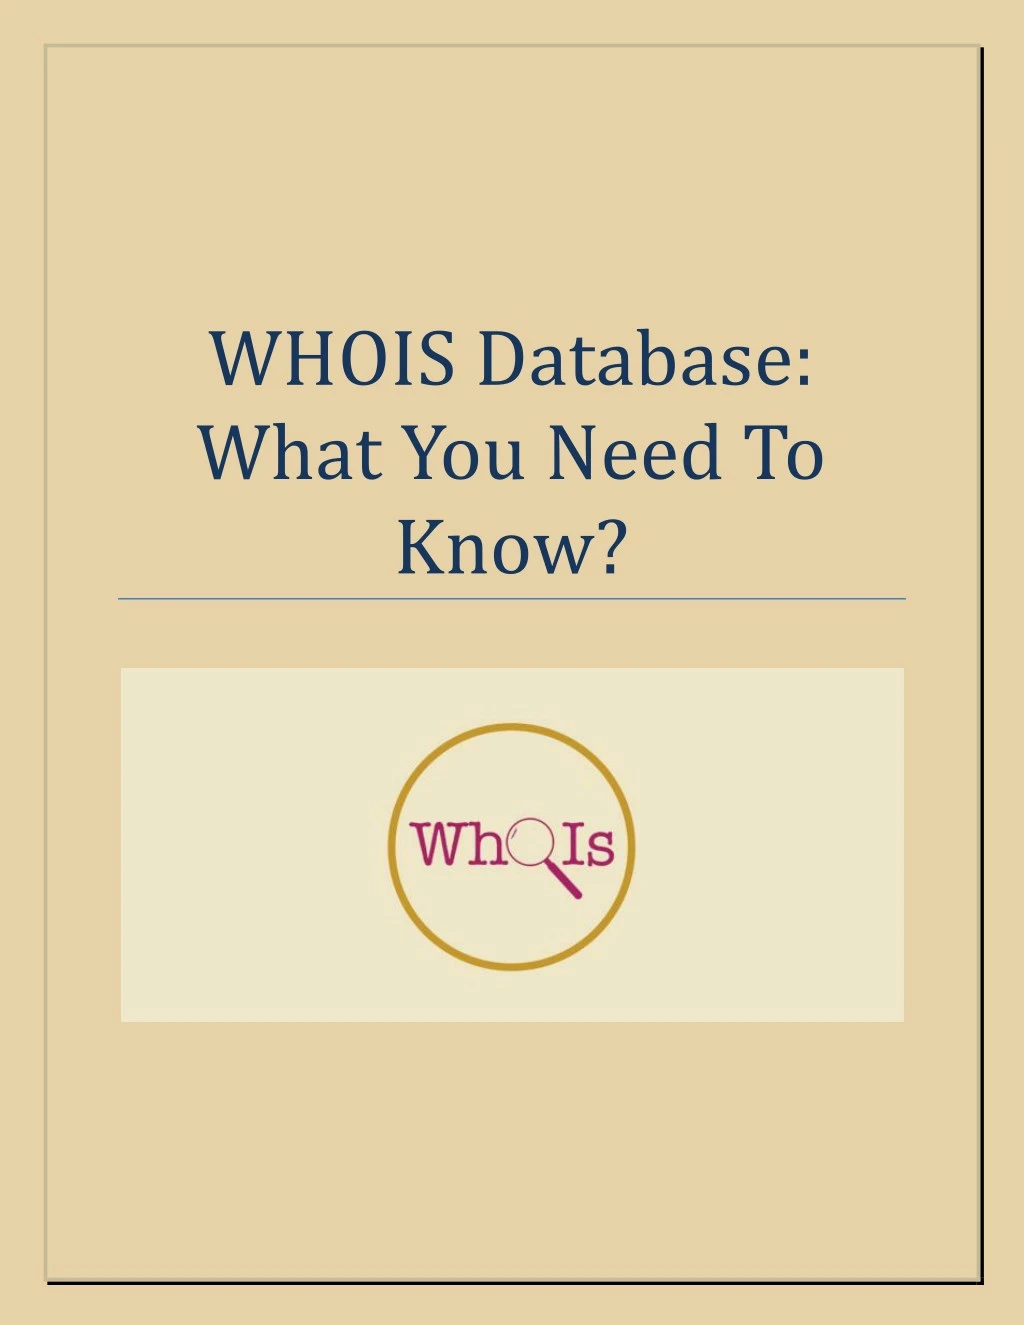 whois database what you need to know